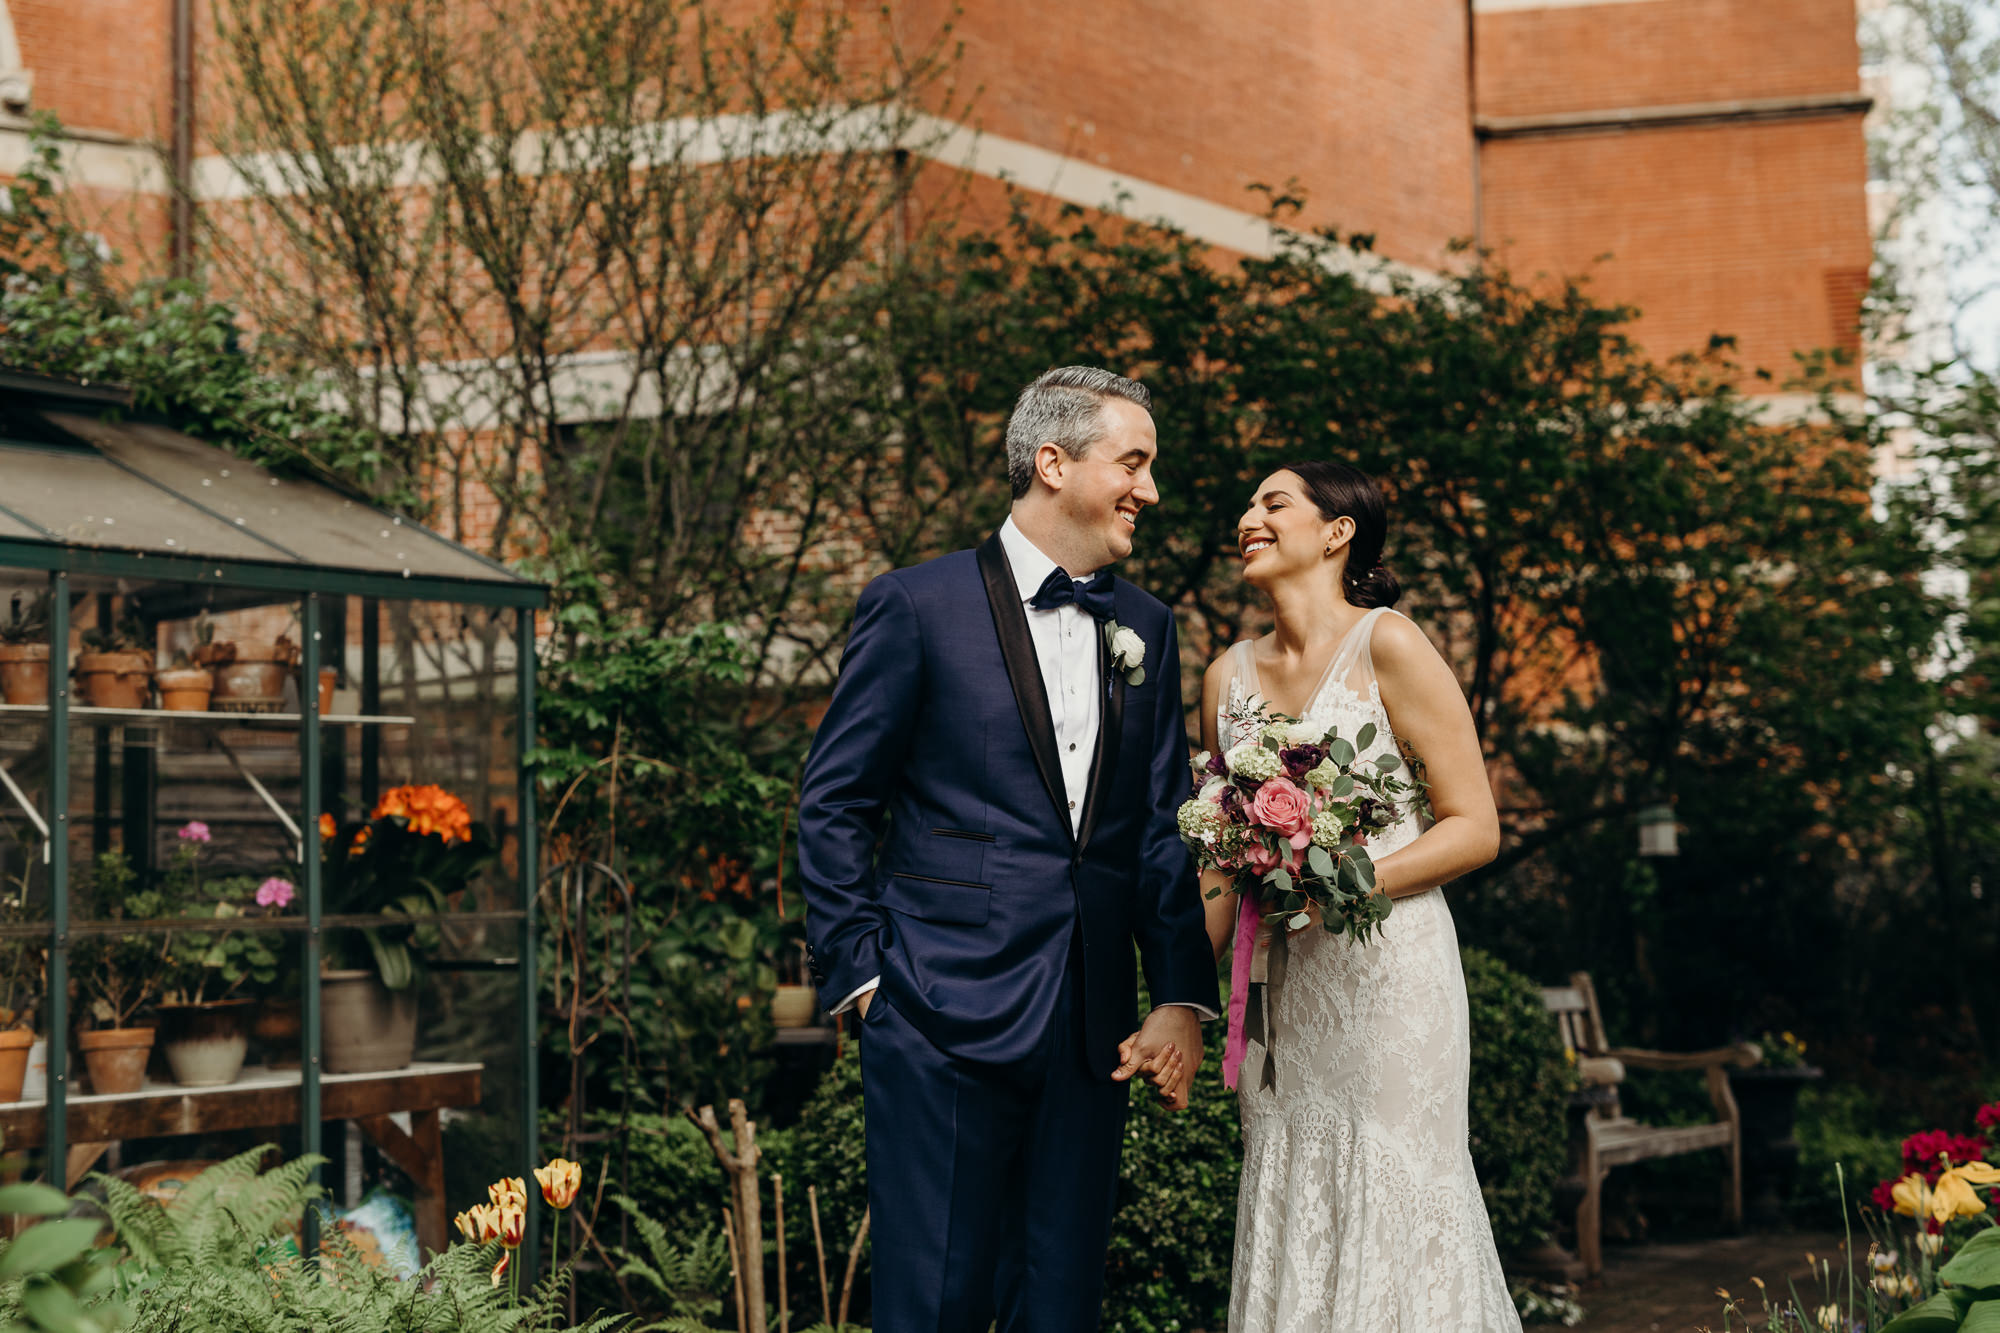 a portrait of a bride and groom at jefferson market garden in the west village, new york city